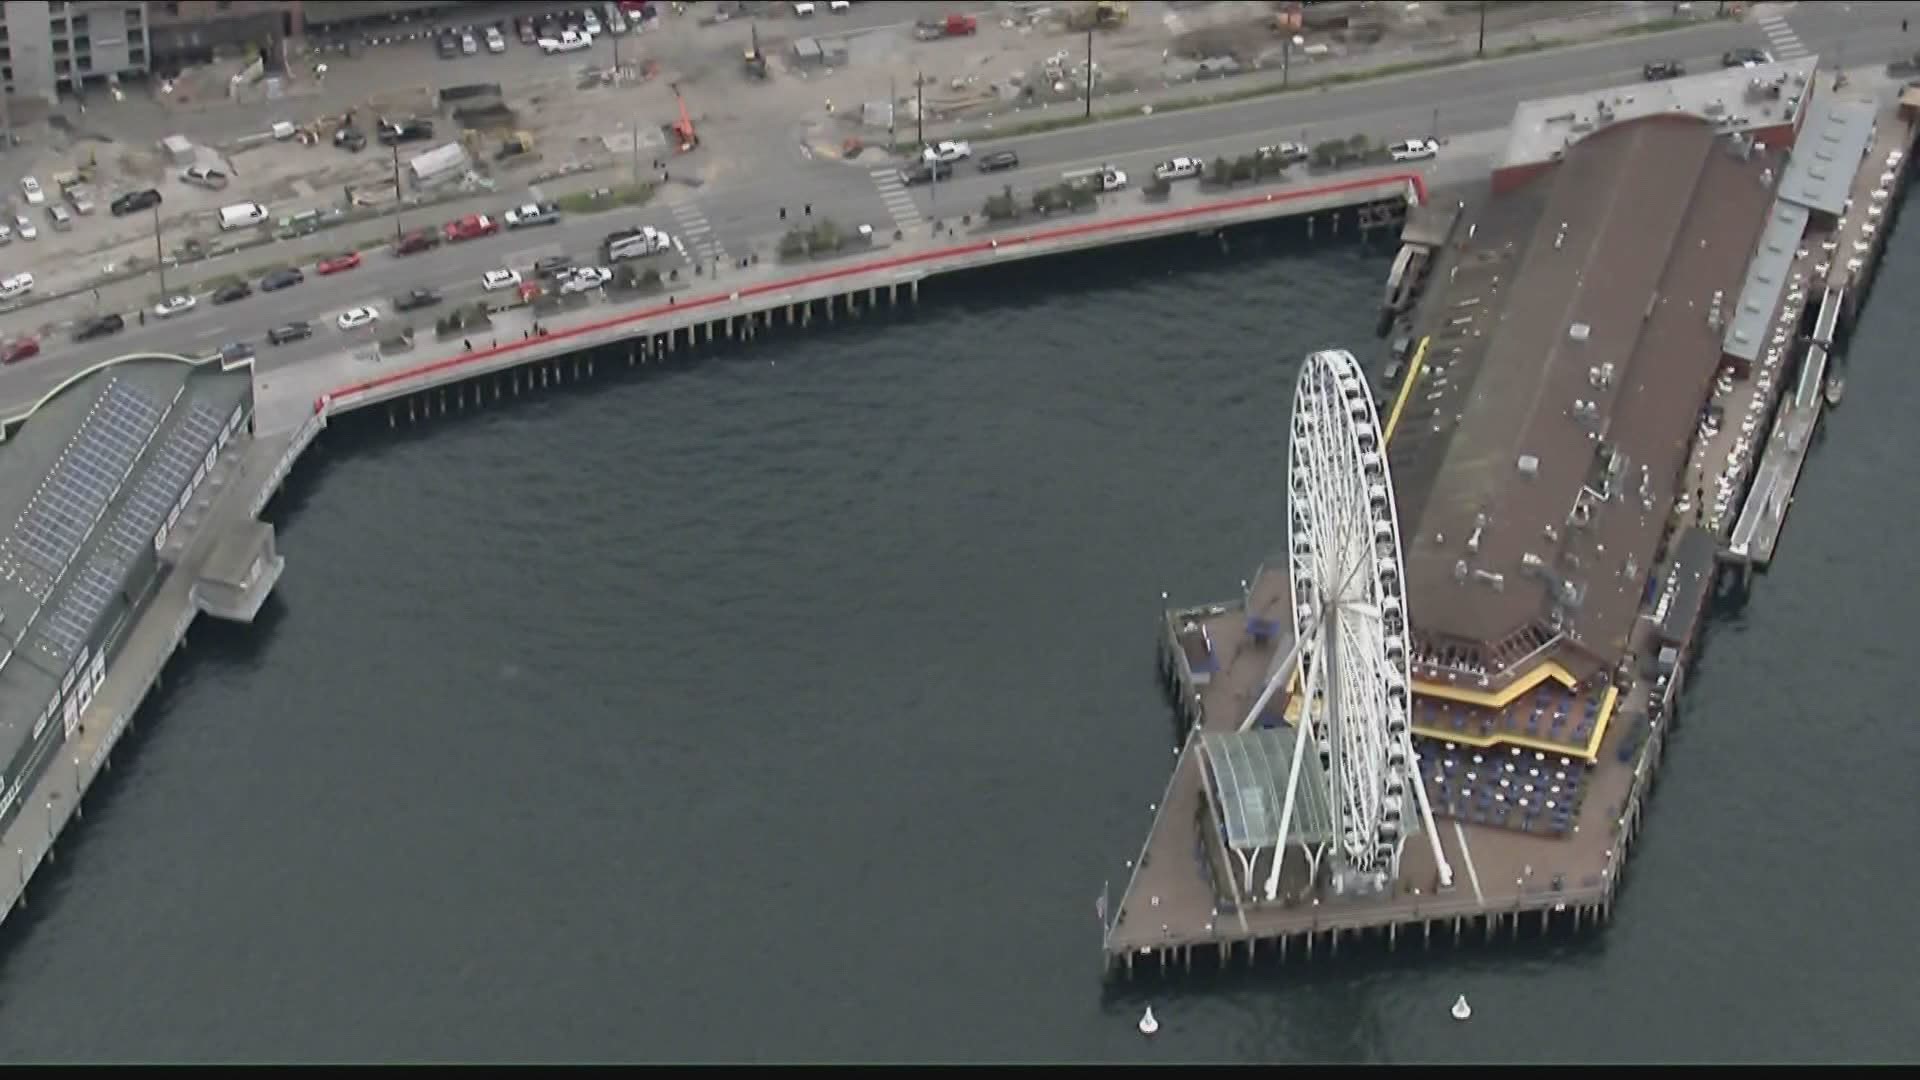 The City of Seattle started removing Pier 58 last year after significant deterioration was found leading to its collapse in September 2020.